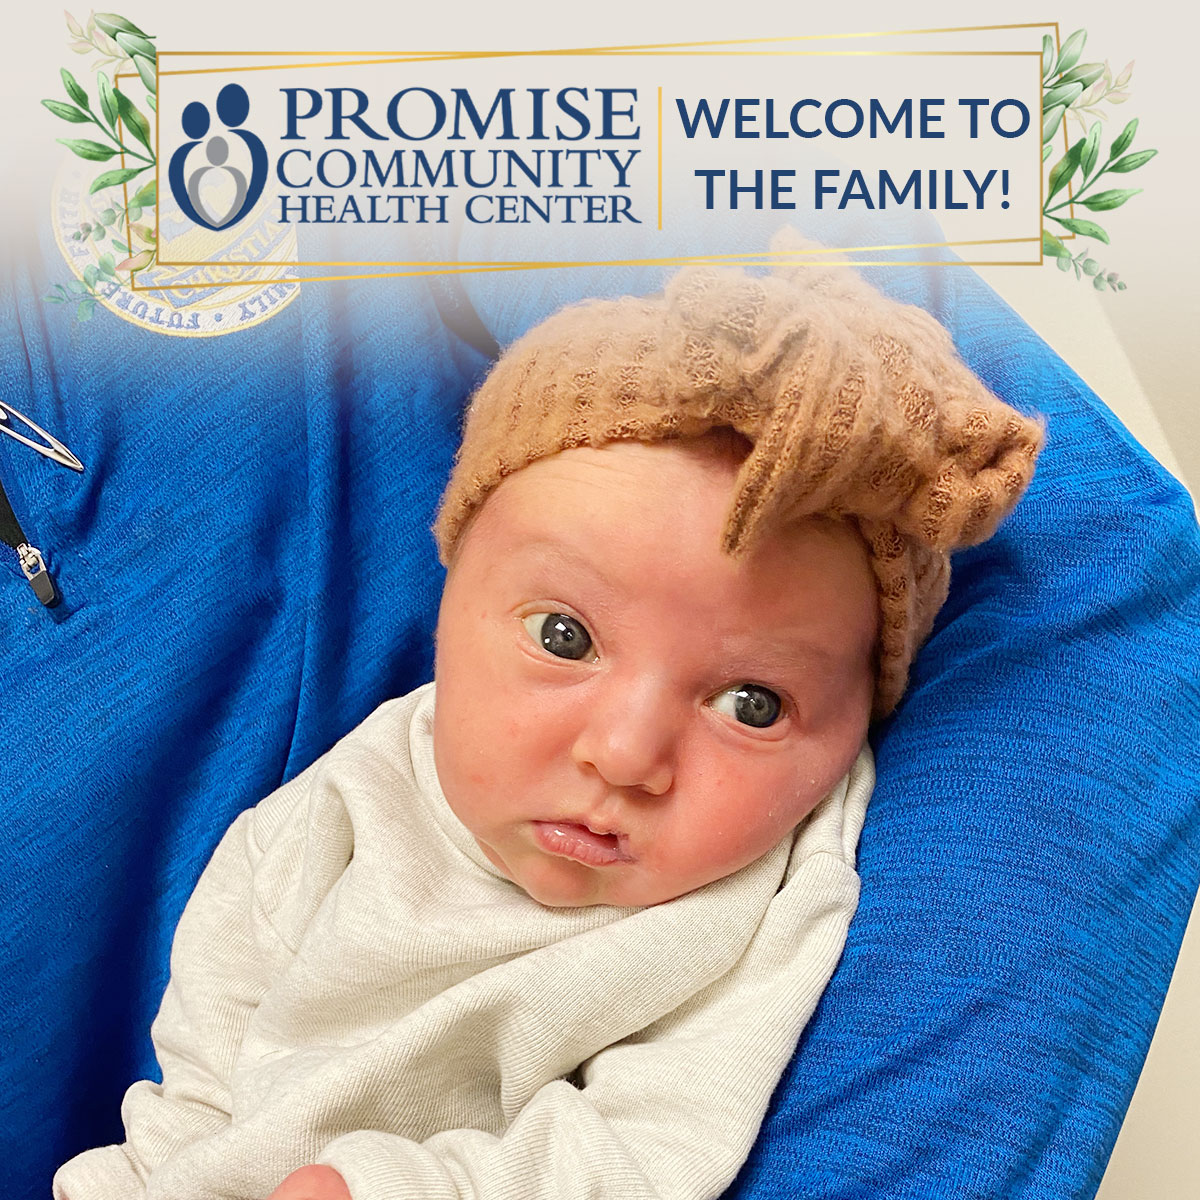 The Kamm family home birth in Sioux City, Iowa | Promise Community Health Center in Sioux Center, Iowa | Home births in northwest Iowa, Home births in southeast South Dakota, Home births in southwest Minnesota | Home births in Sioux Falls South Dakota, Home births in Beresford South Dakota, Home births in Sioux City IA, Home births in LeMars IA, Home births in Worthington MN, Home births in Iowa, Home births in South Dakota, Home births in Minnesota